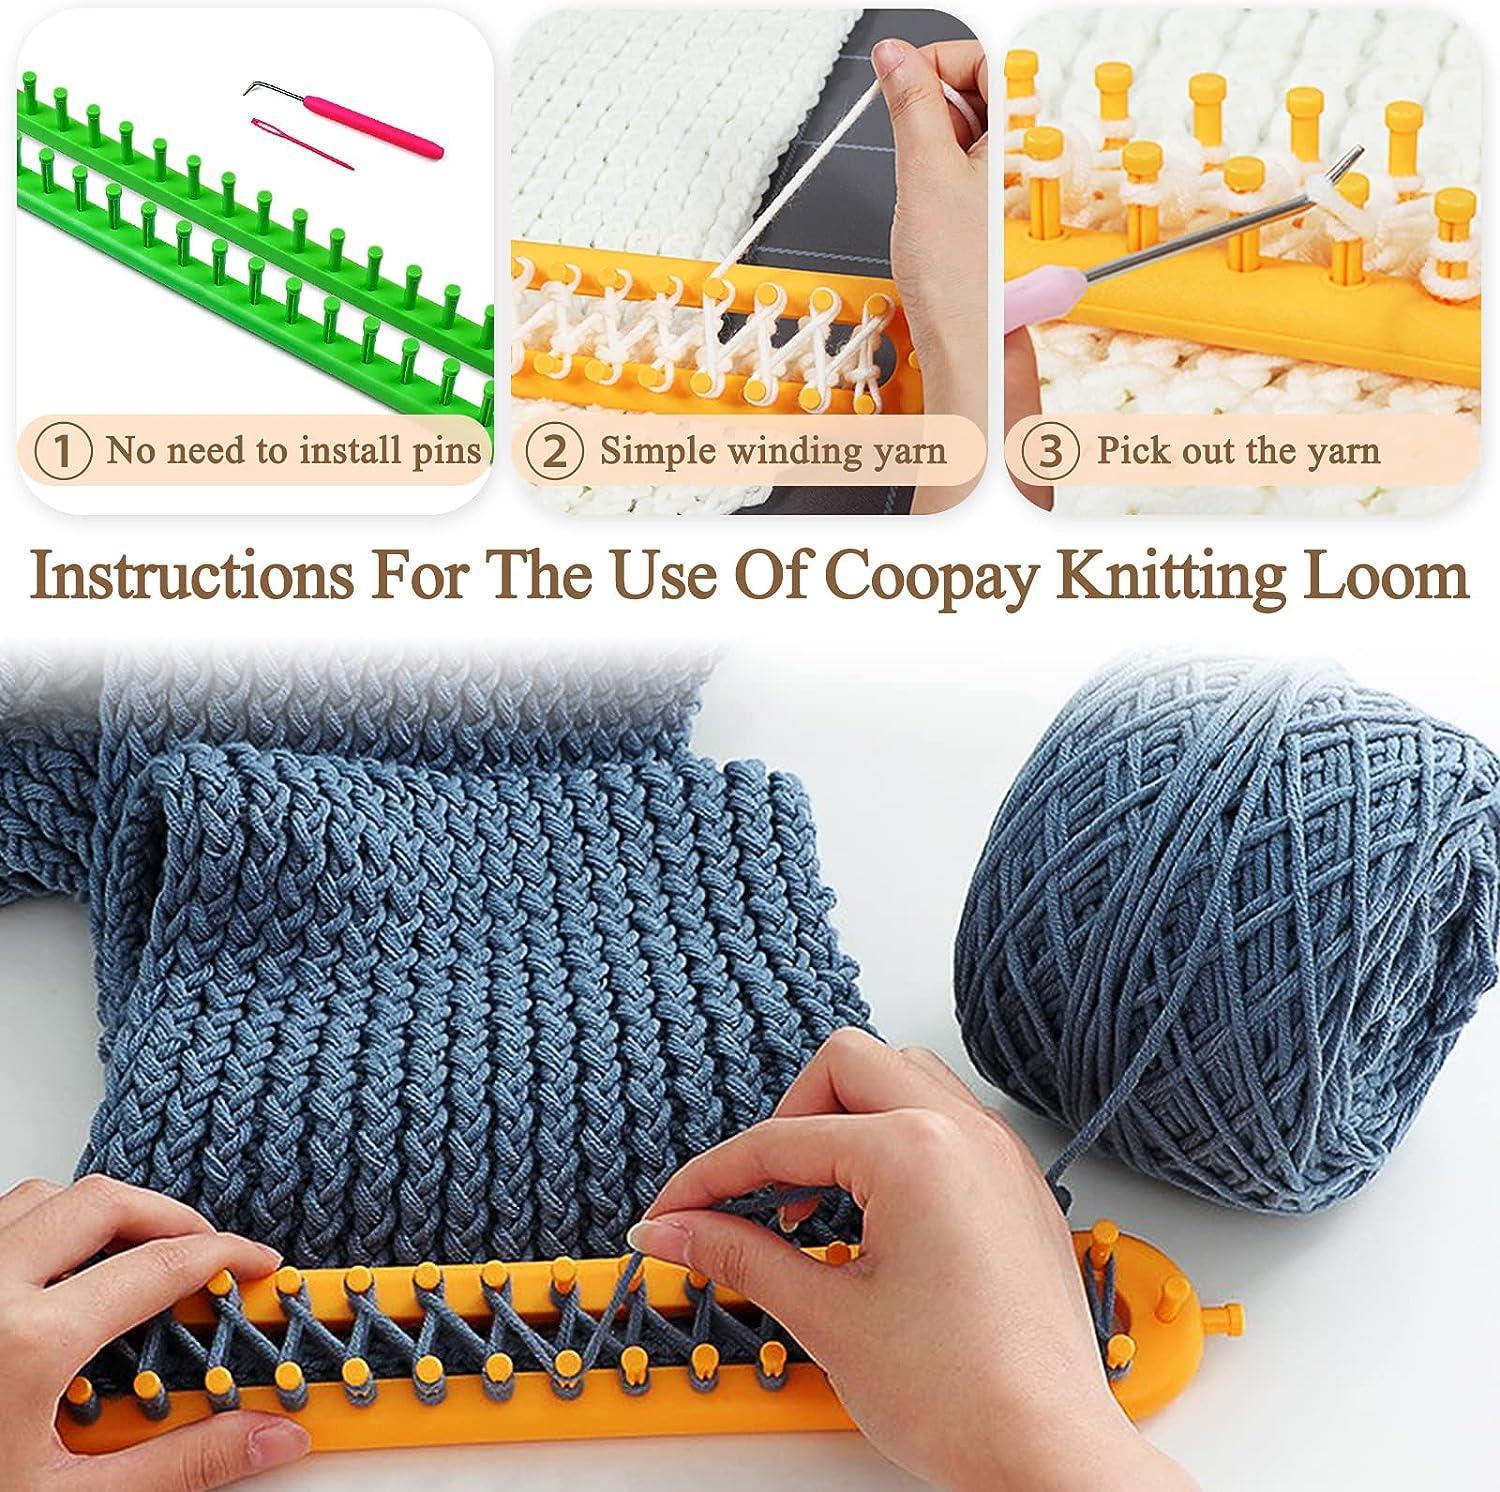  Coopay Knitting Loom Long Knitting Loom Kit, Rectangle Knitting  Looms for Blanket Scarf Shawl, 47 cm Green Loom Knitting Crochet Loom, Loom  Knitting Kit Blanket Loom with Hook & Needles for